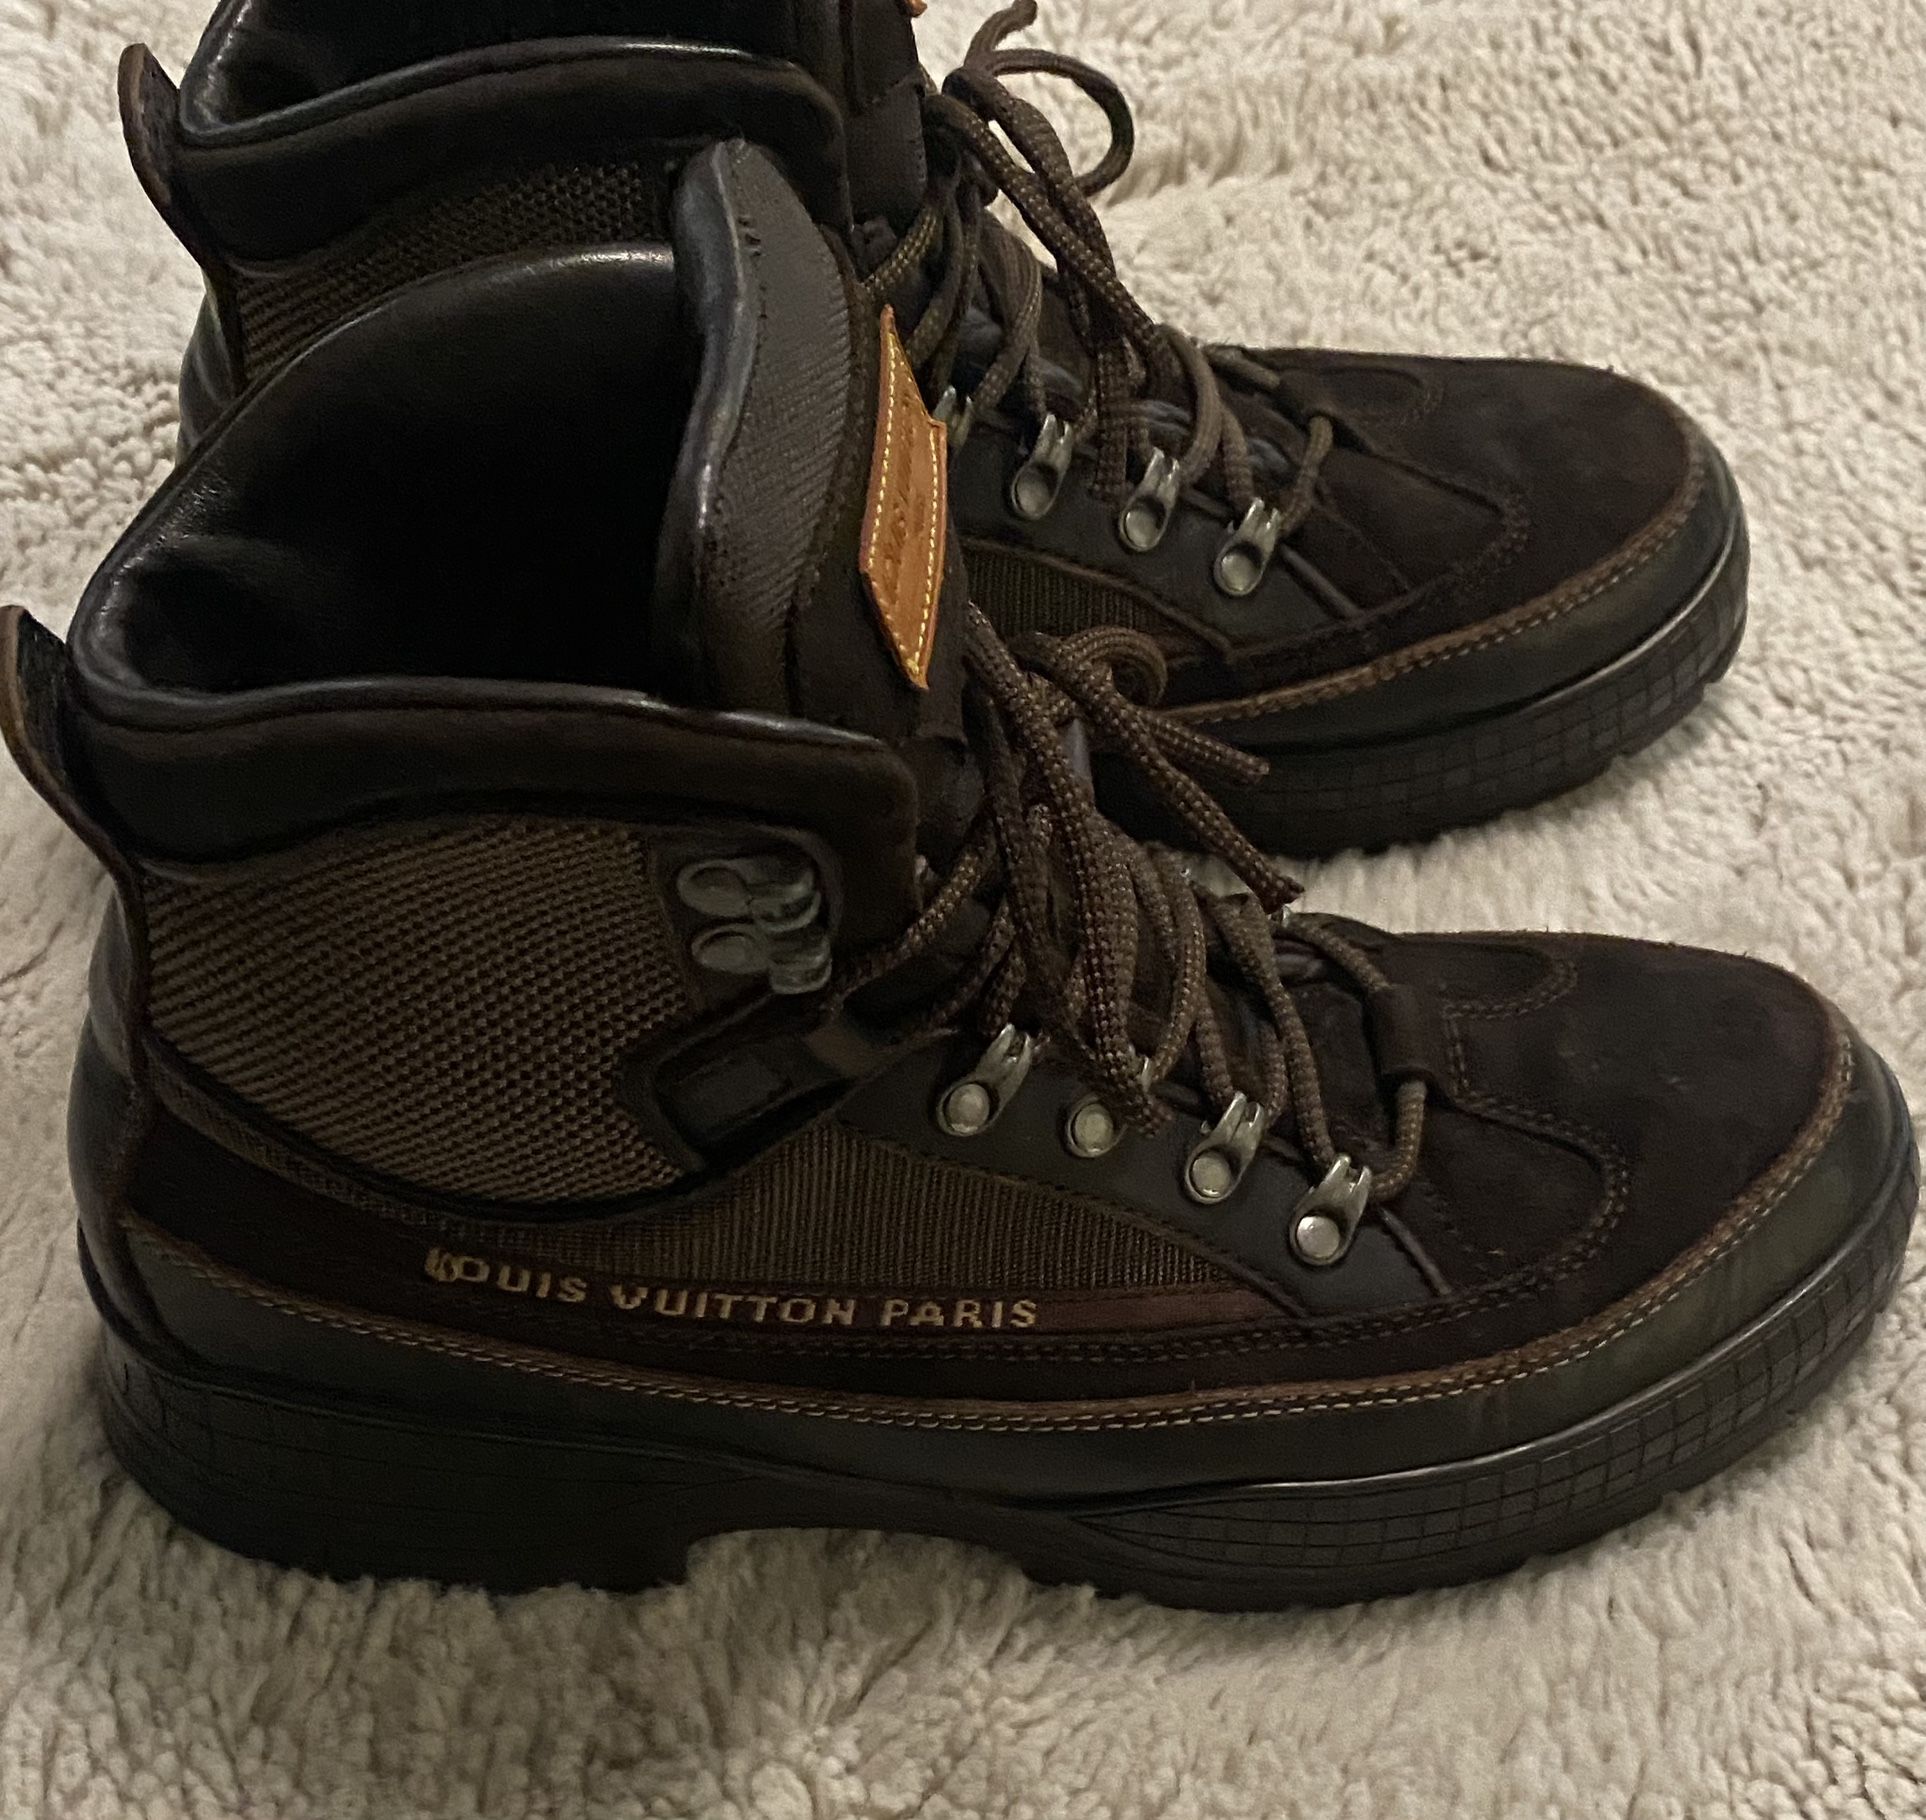 Lv shoes for Sale in Los Angeles, CA - OfferUp